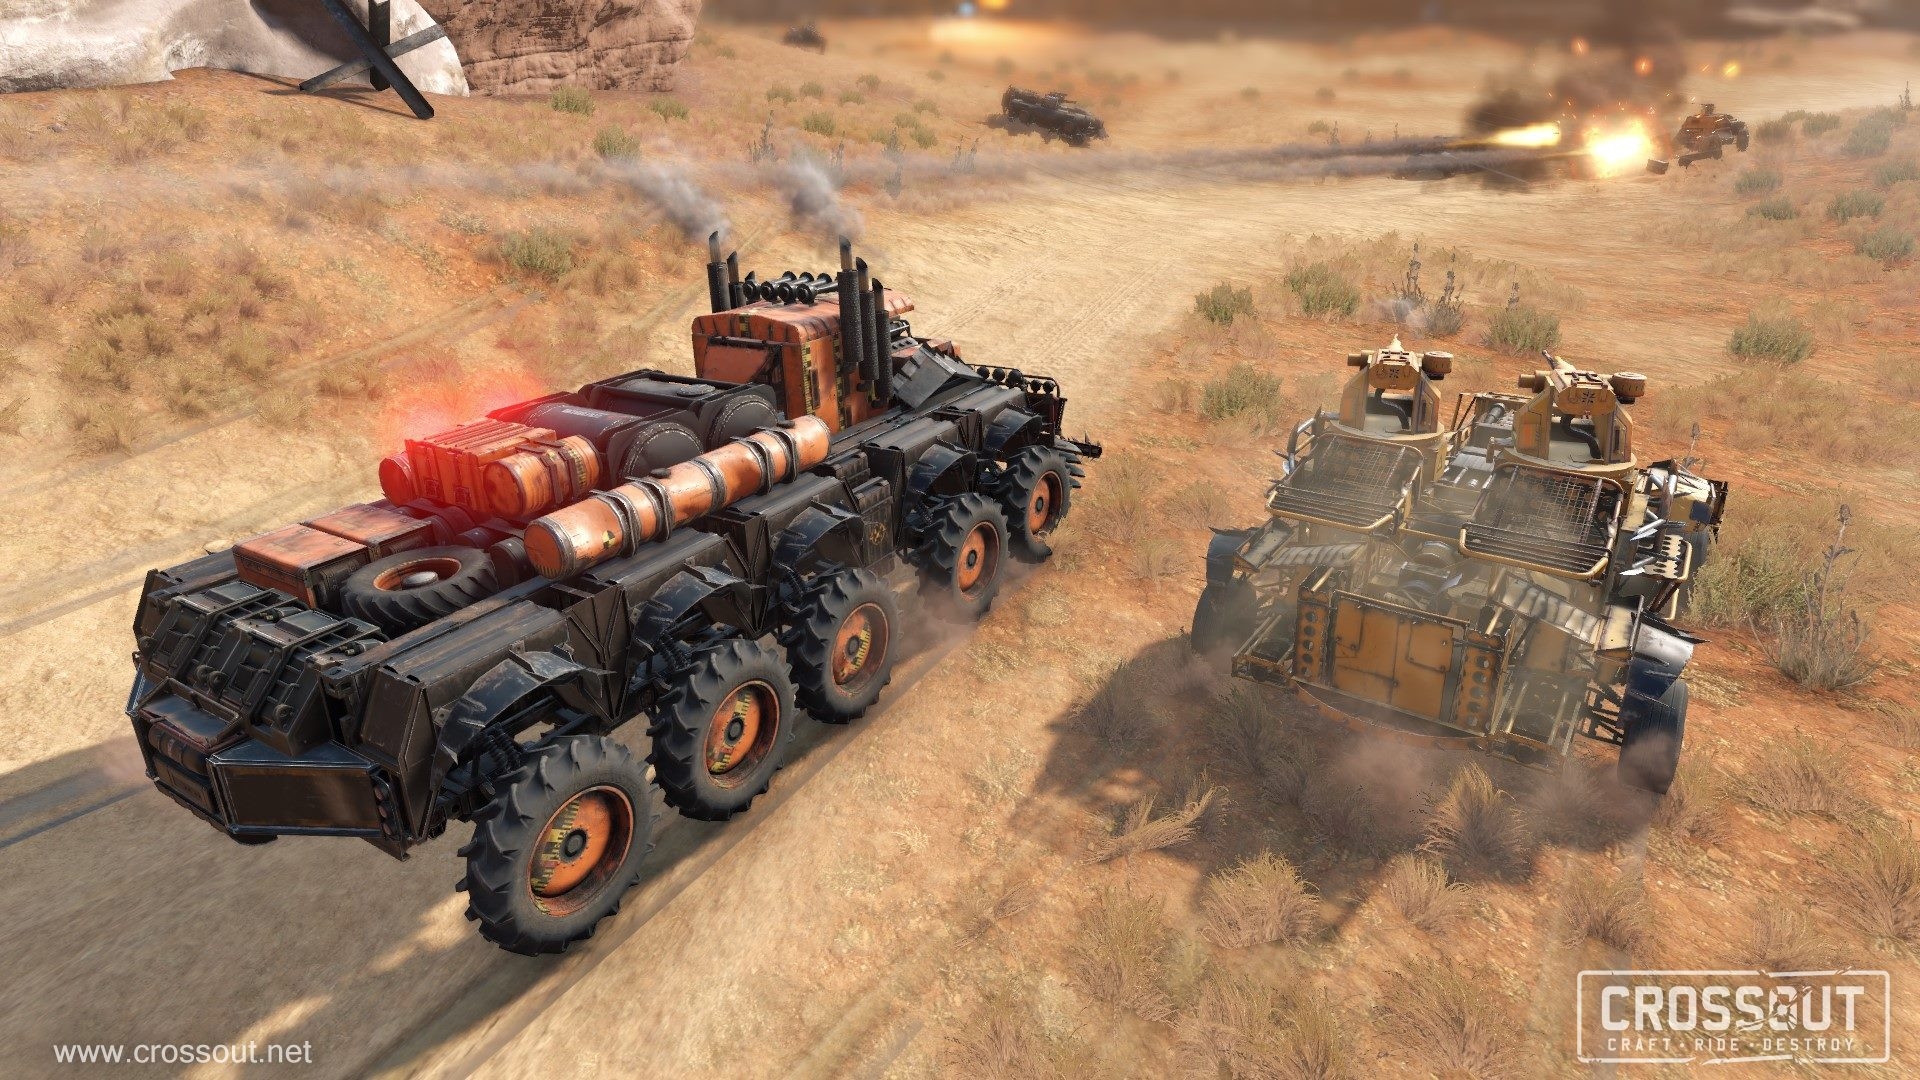 Cross out the excess. Мисти кроссаут. Crossout 2.0. Кроссаут волкодав. Кроссаут Гермес.